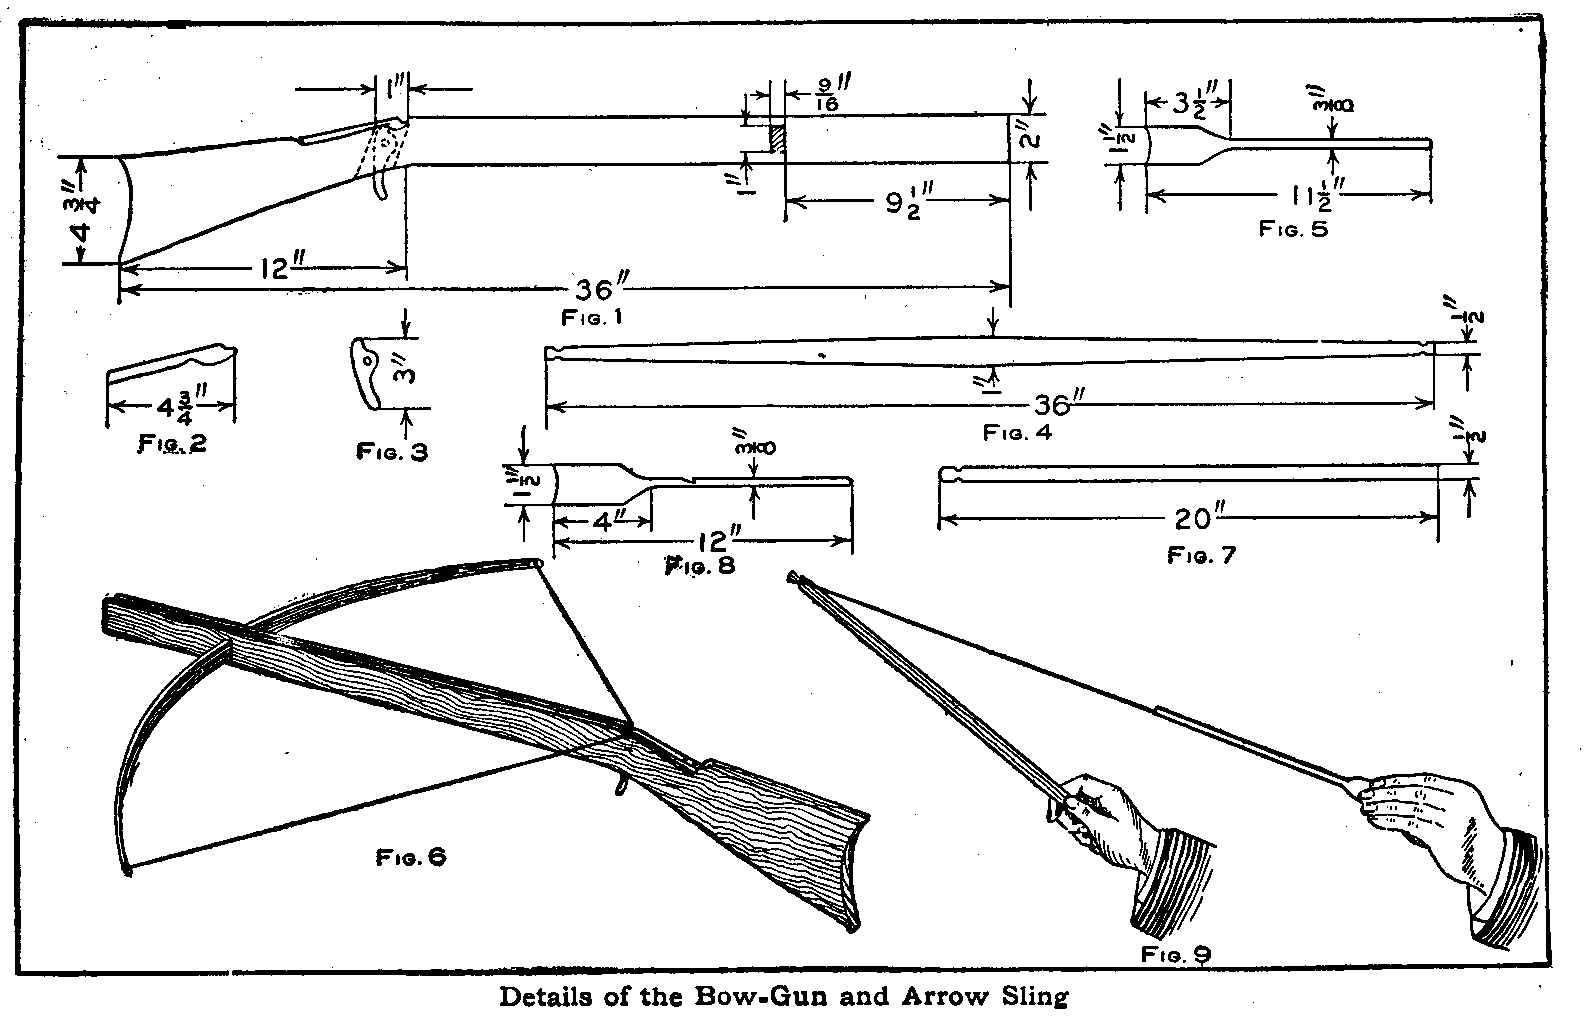 Details of the Bow-Gun and Arrow Sling 